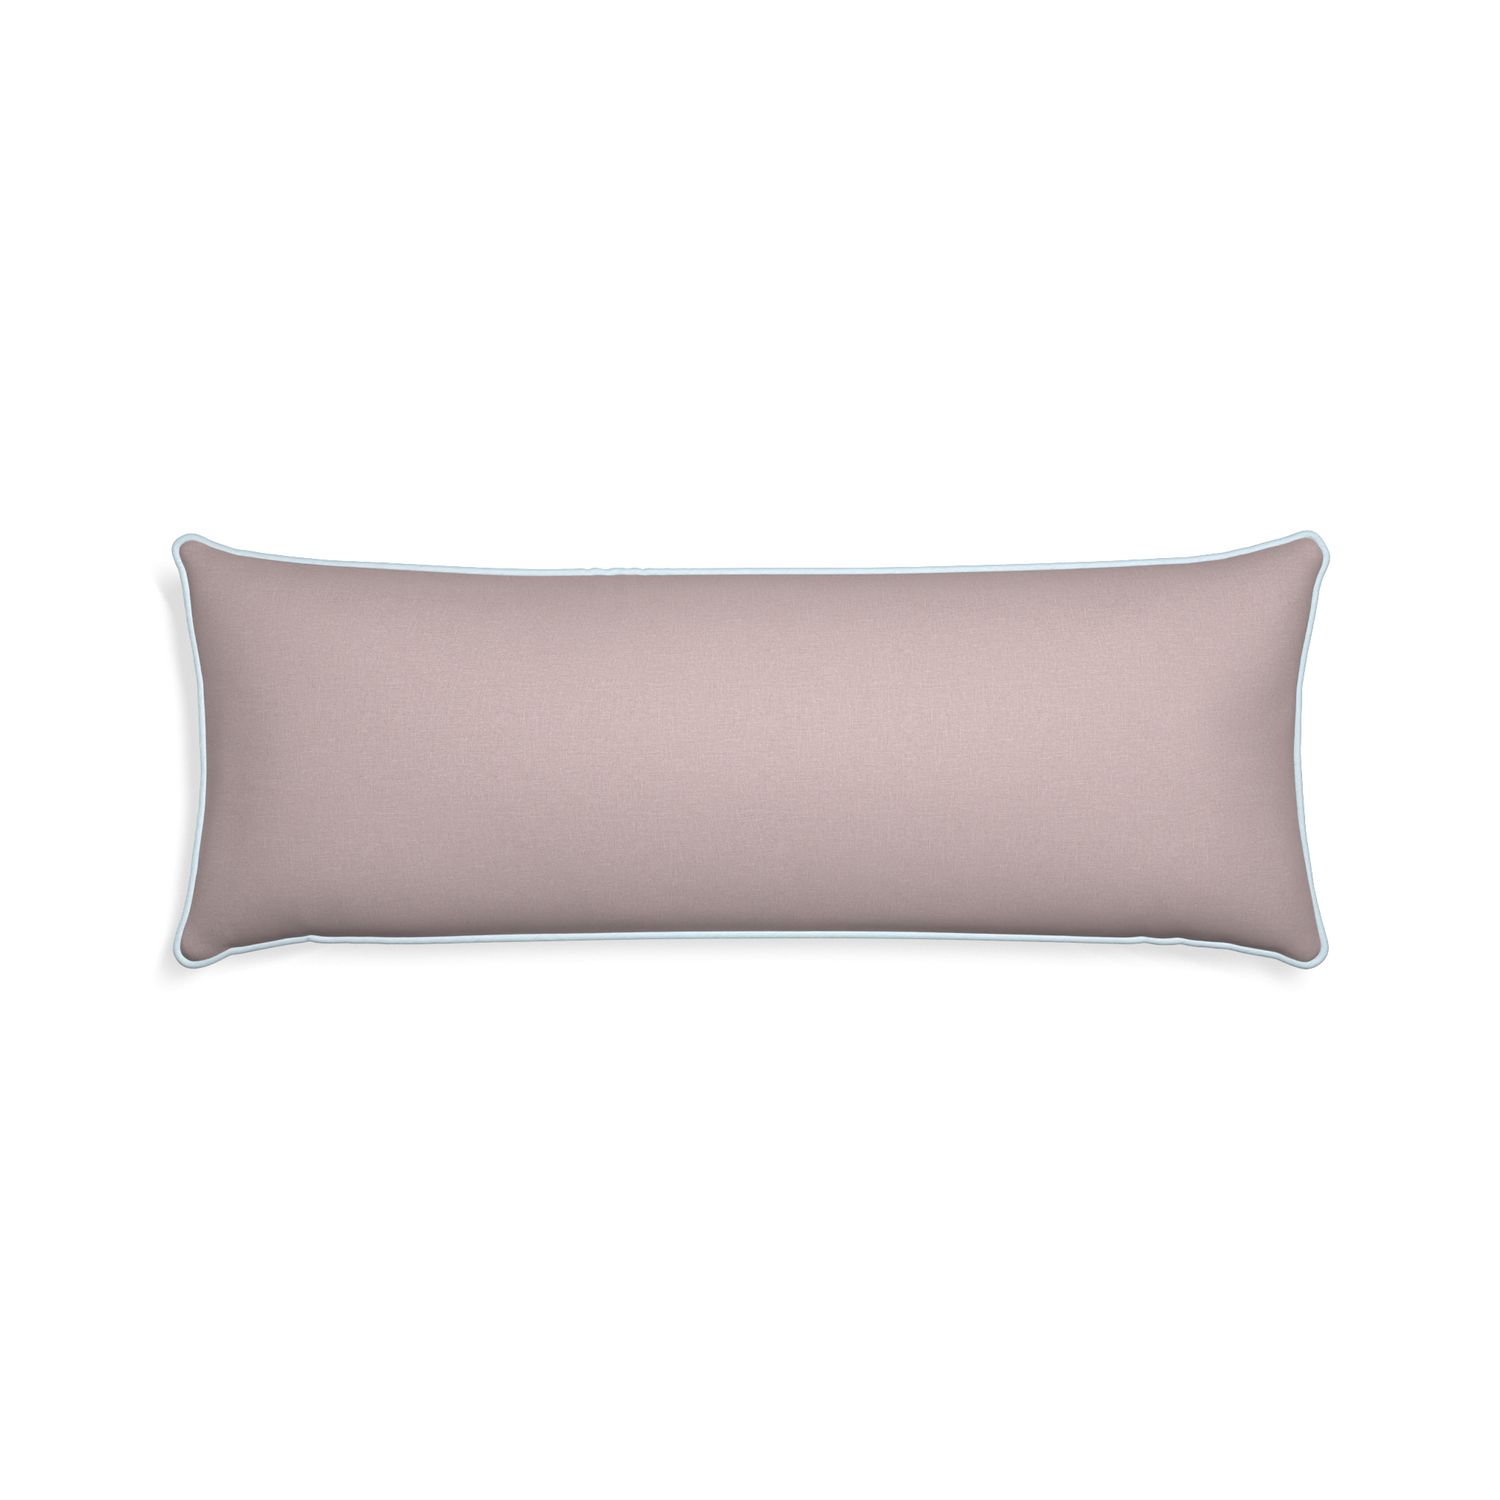 Xl-lumbar orchid custom mauve pinkpillow with powder piping on white background